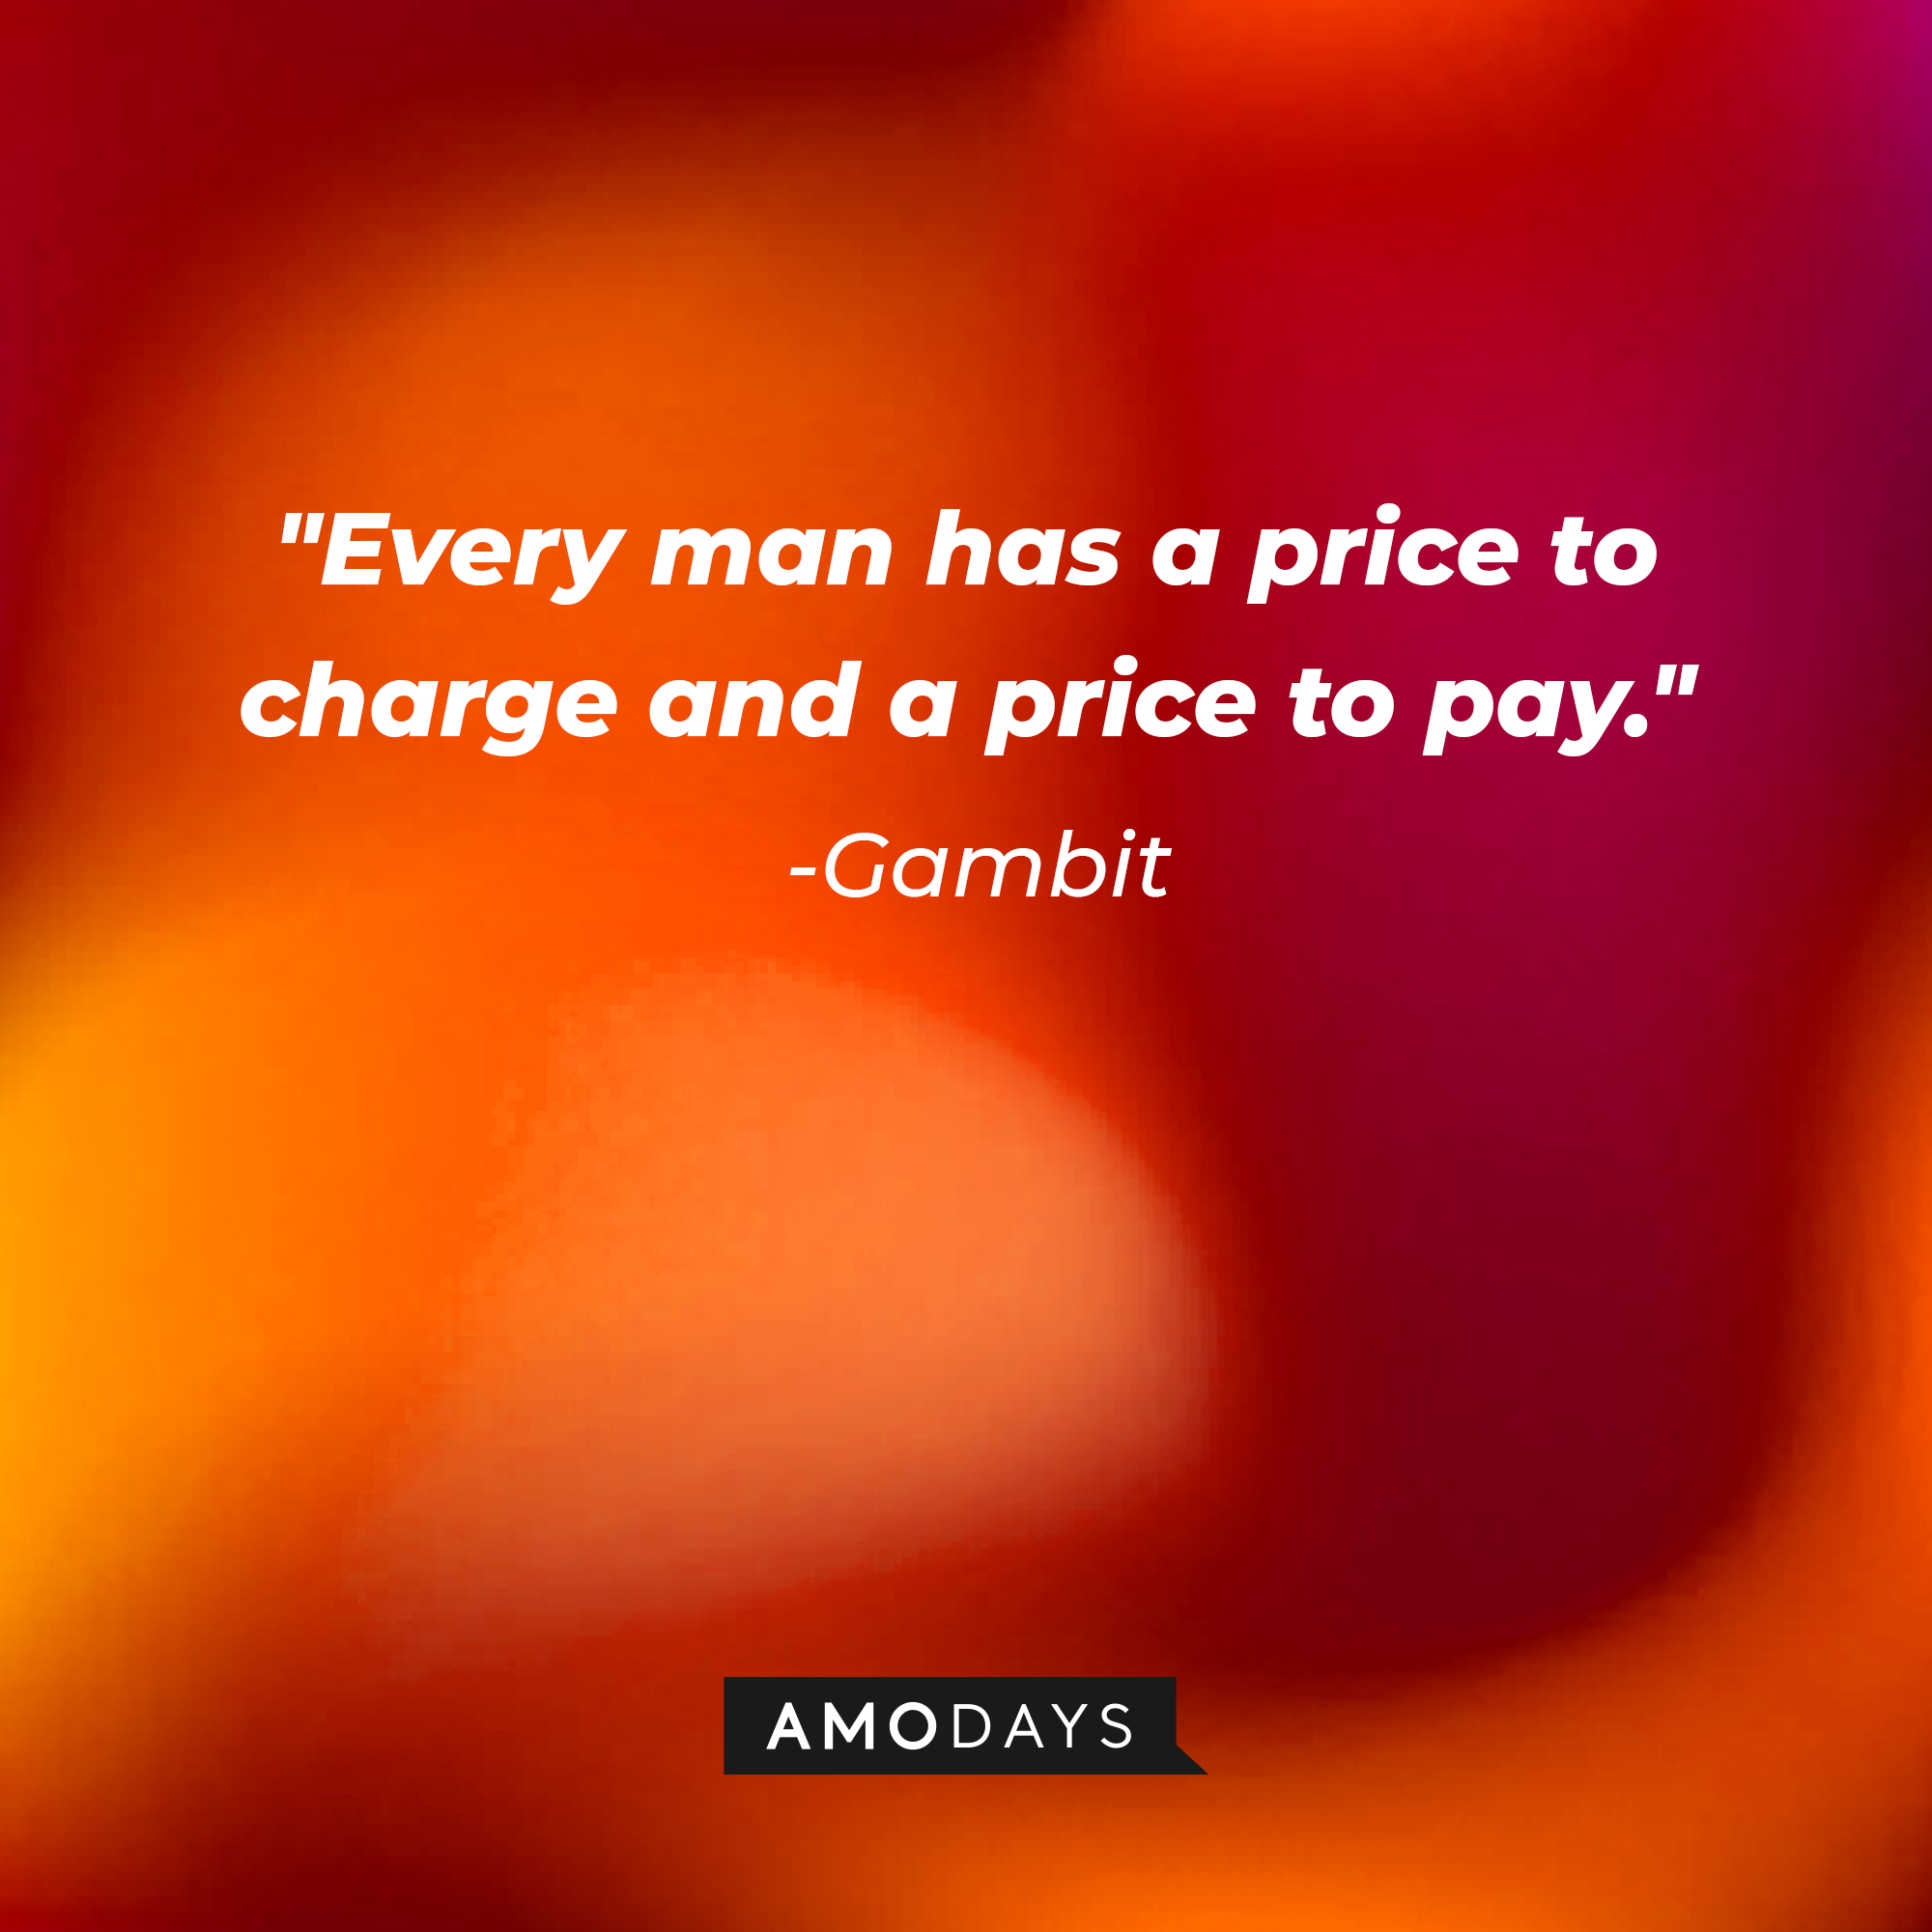 Gambit’s quote: "Every man has a price to charge and a price to pay." | Source: AmoDays